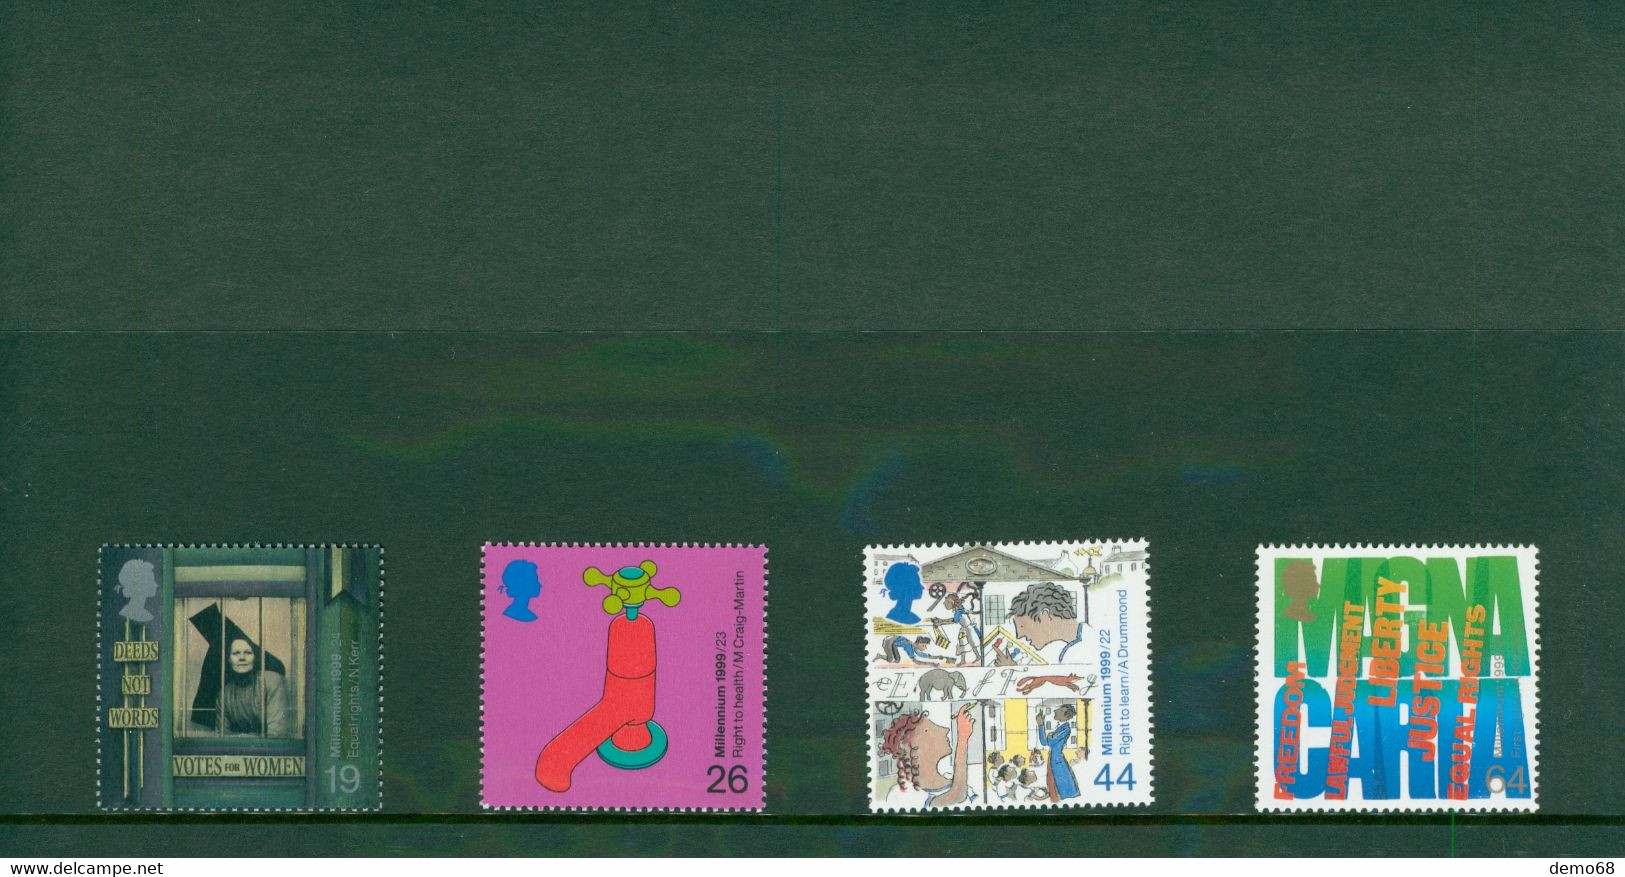 Stamp Timbre England Great Britain British Citizens' Tale Not Vote NoVoceFeuillet Neuf 4 Timbre S Royal Mail Mint Stamps - Collezioni